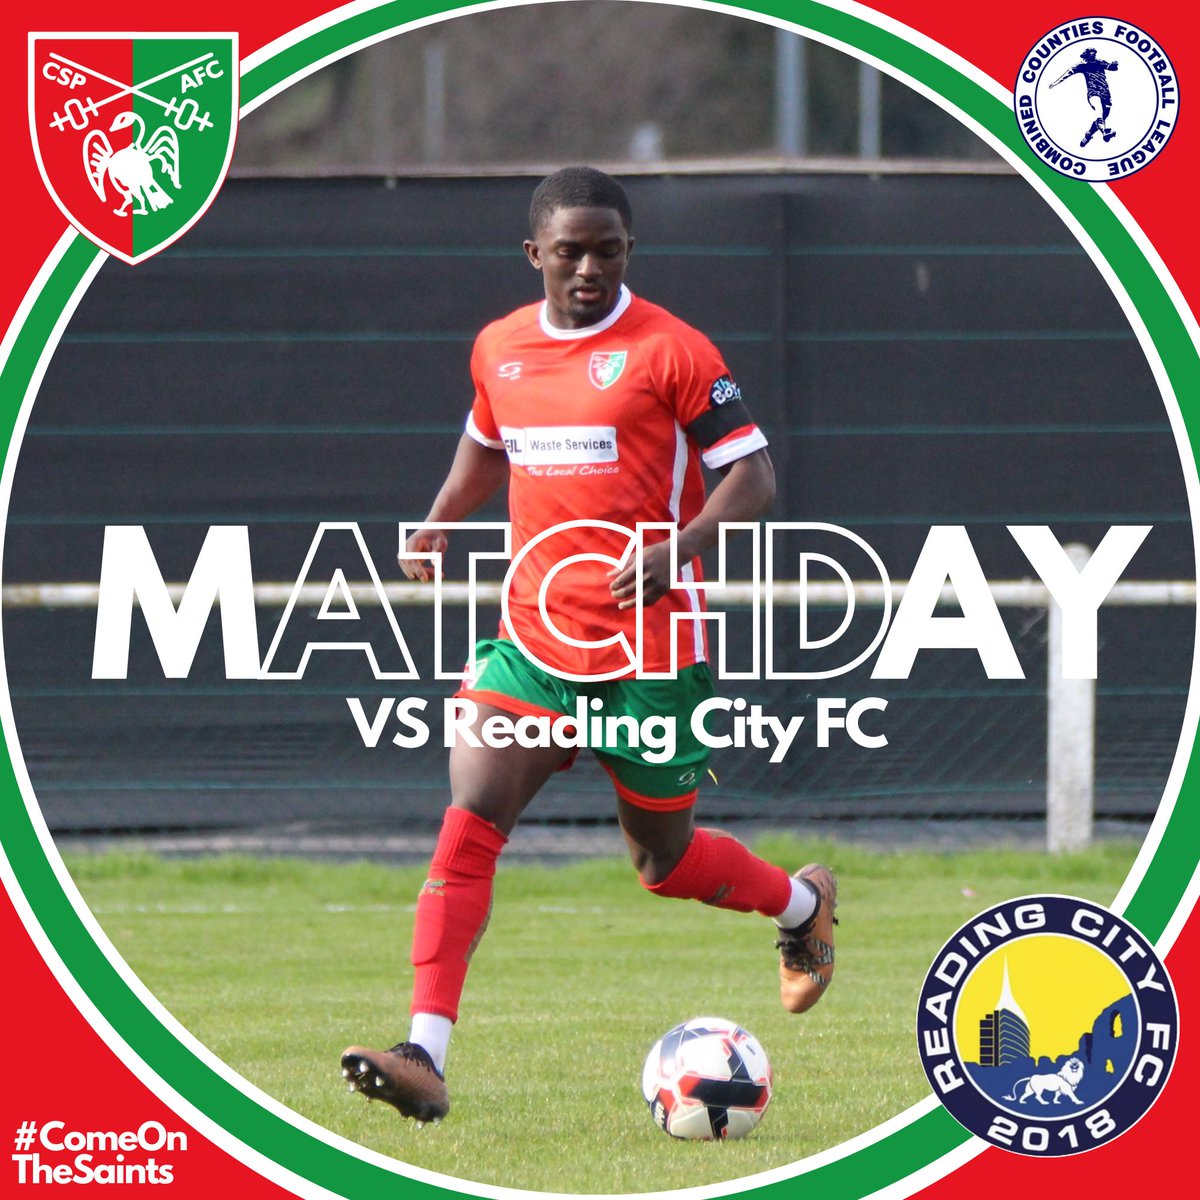 𝕸𝖆𝖙𝖈𝖍𝖉𝖆𝖞! Join us back at home as we squeeze in a very late notice, midweek fixture against Reading City! 🏆 @ComCoFL 🆚 @ReadingCityFC 📆 TODAY! ⏰ 7:45pm 🏟 Mill Meadow, SL9 9QX 🎟 Adult £9 | Cons £5 | 12-17 £3 | Under 12 FREE ❤️💚 #ComeOnTheSaints